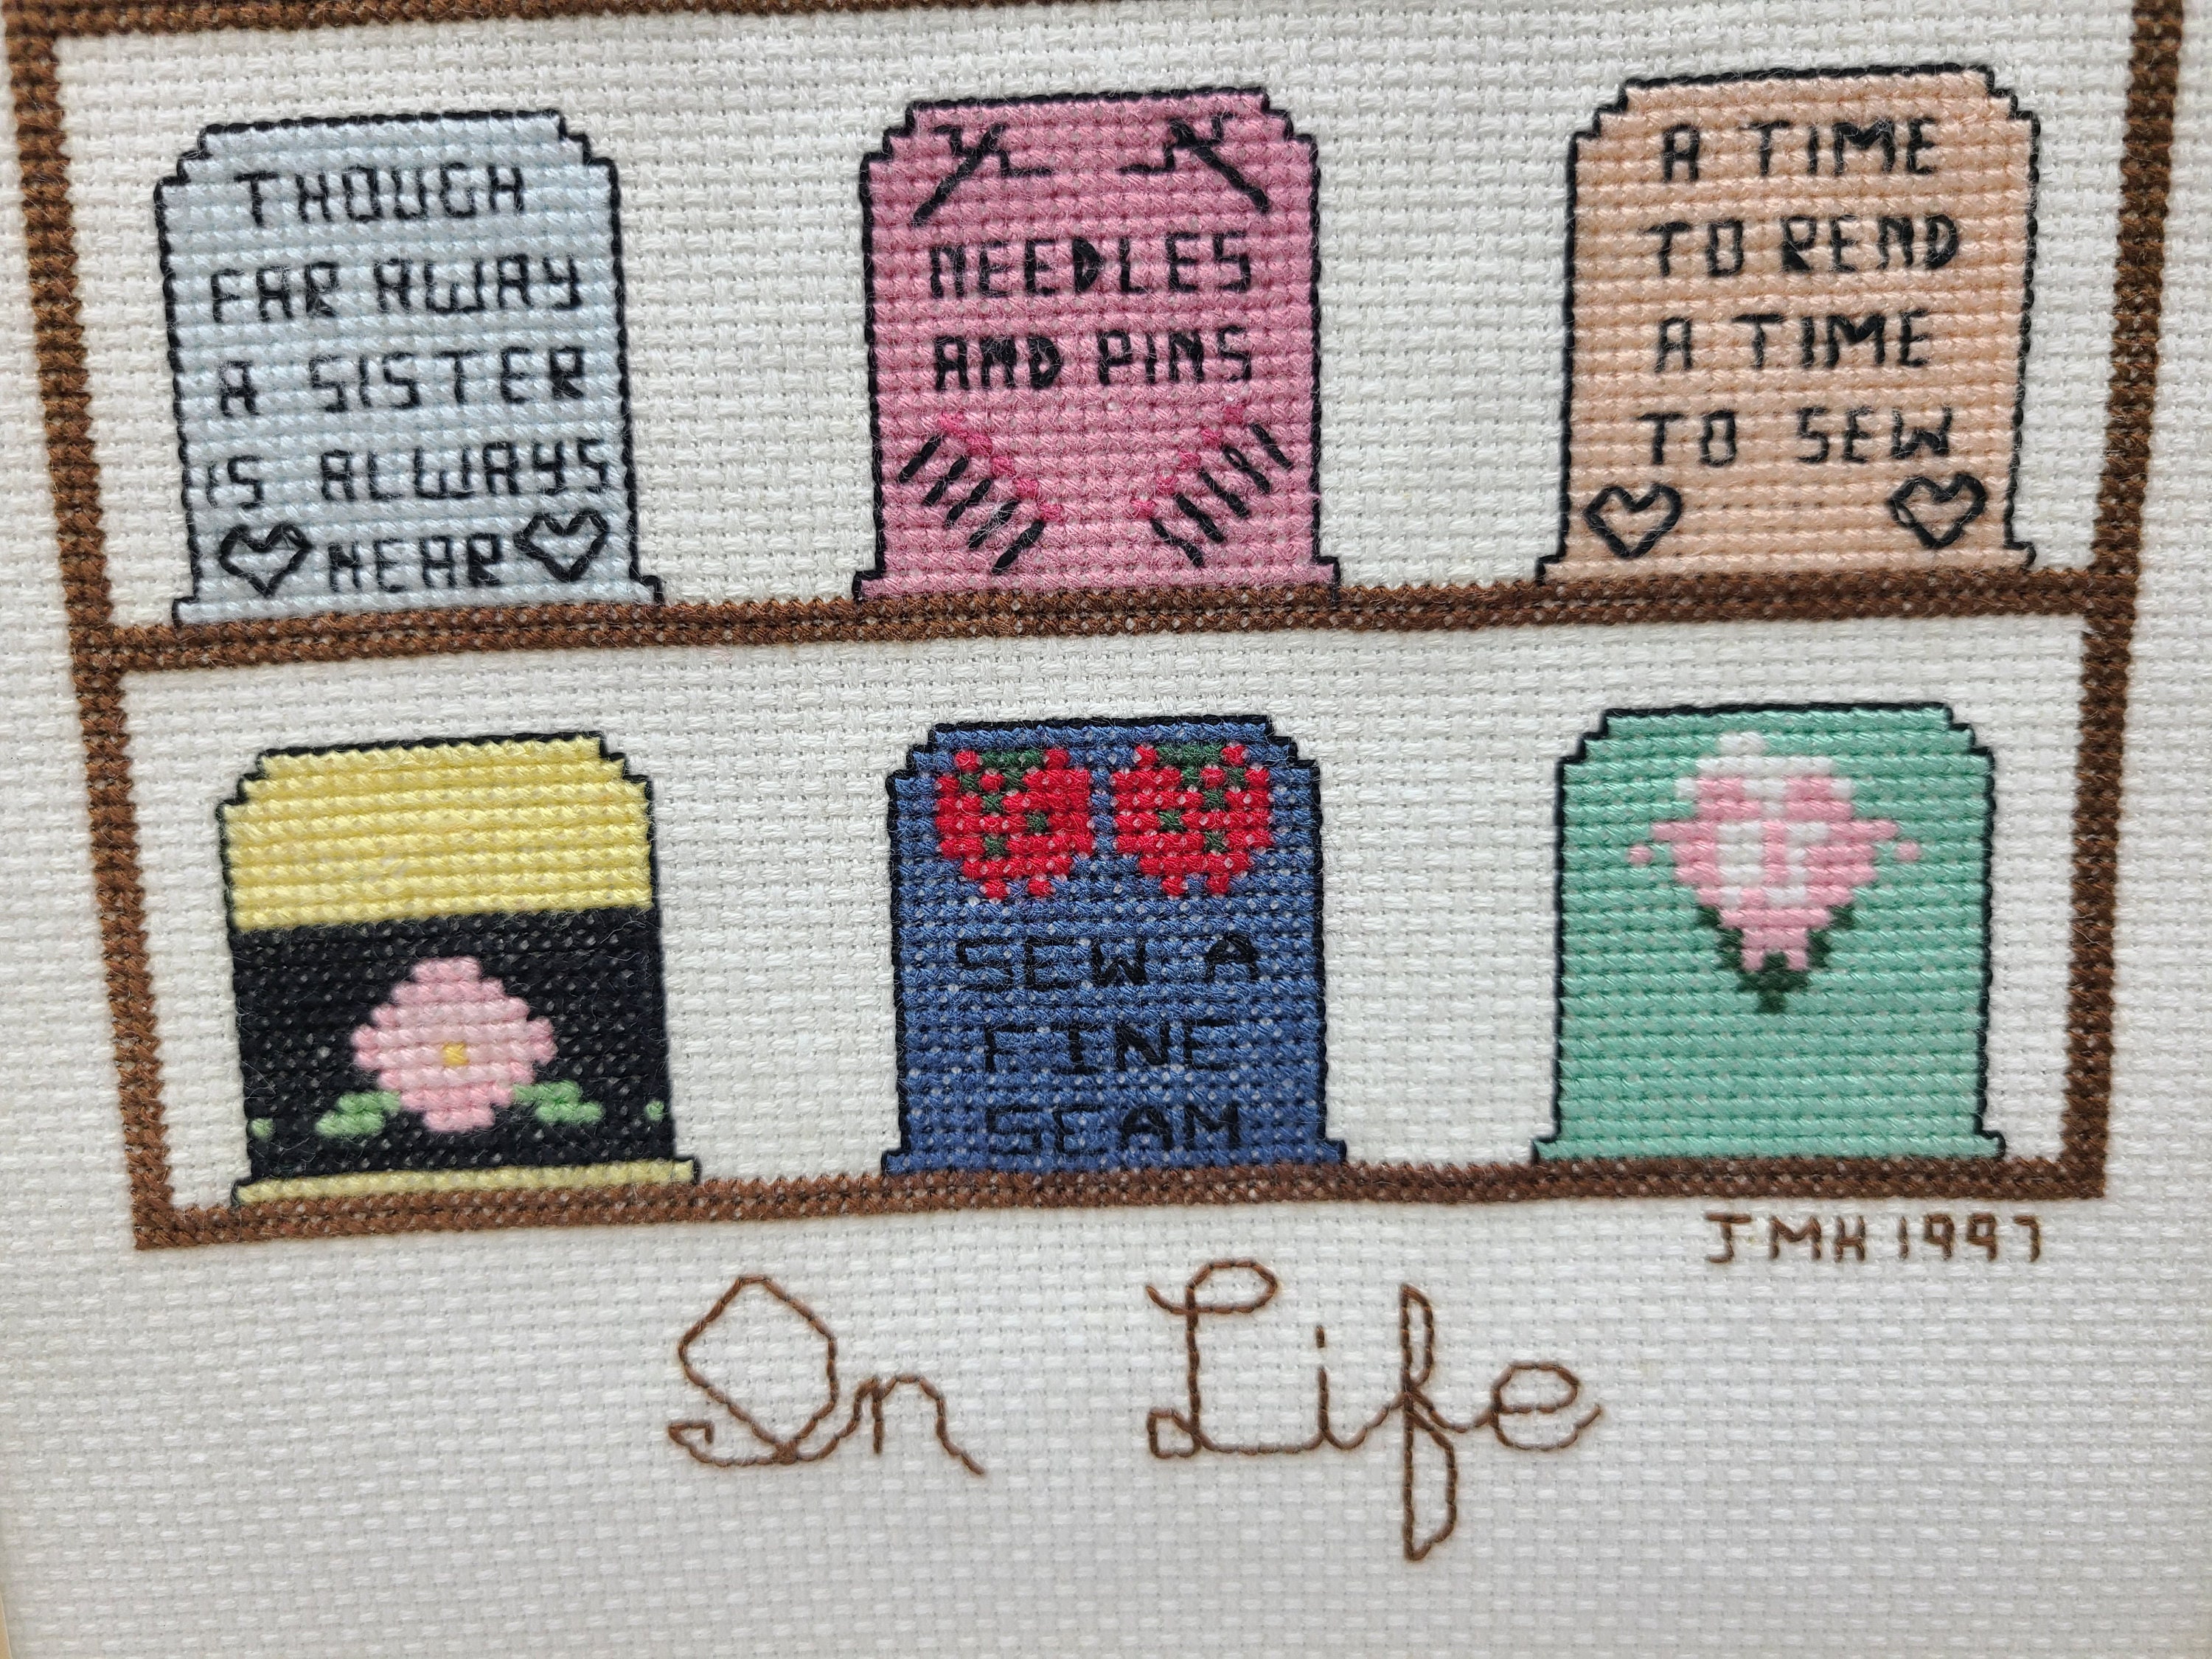 CHAT] Any thimble love here? : r/CrossStitch